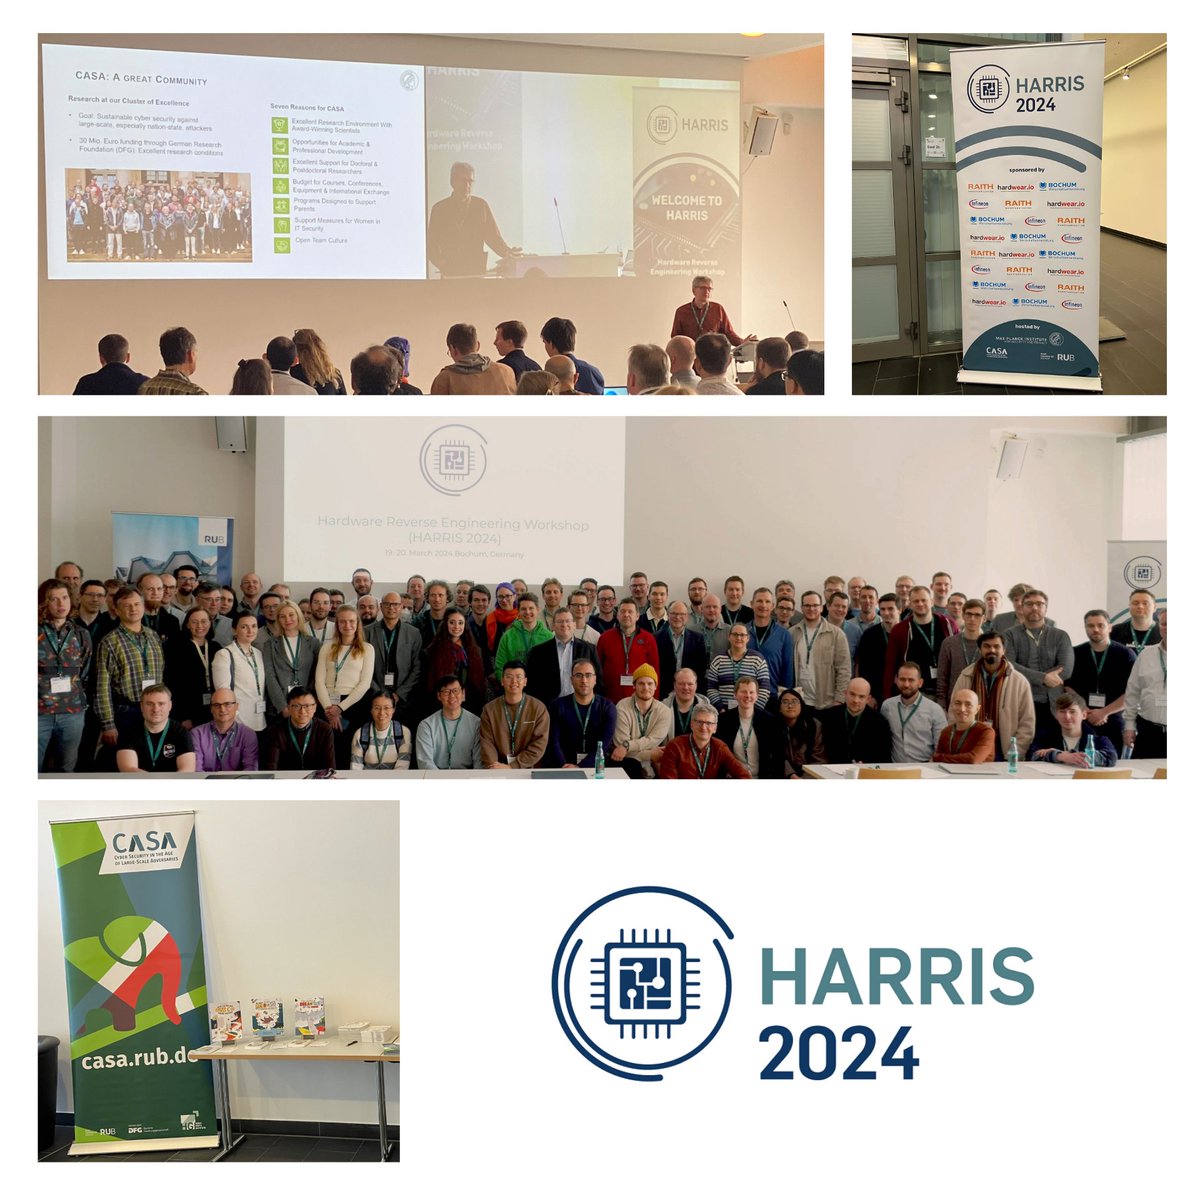 #HARRIS2024: From March 19-20, MPI-SP & CASA hosted the global hardware reverse engineering community: We look back on exciting days with an inspiring scientific program, plenty of networking & brainstorming on current challenges in the field: harris2024.mpi-sp.org #Bochum